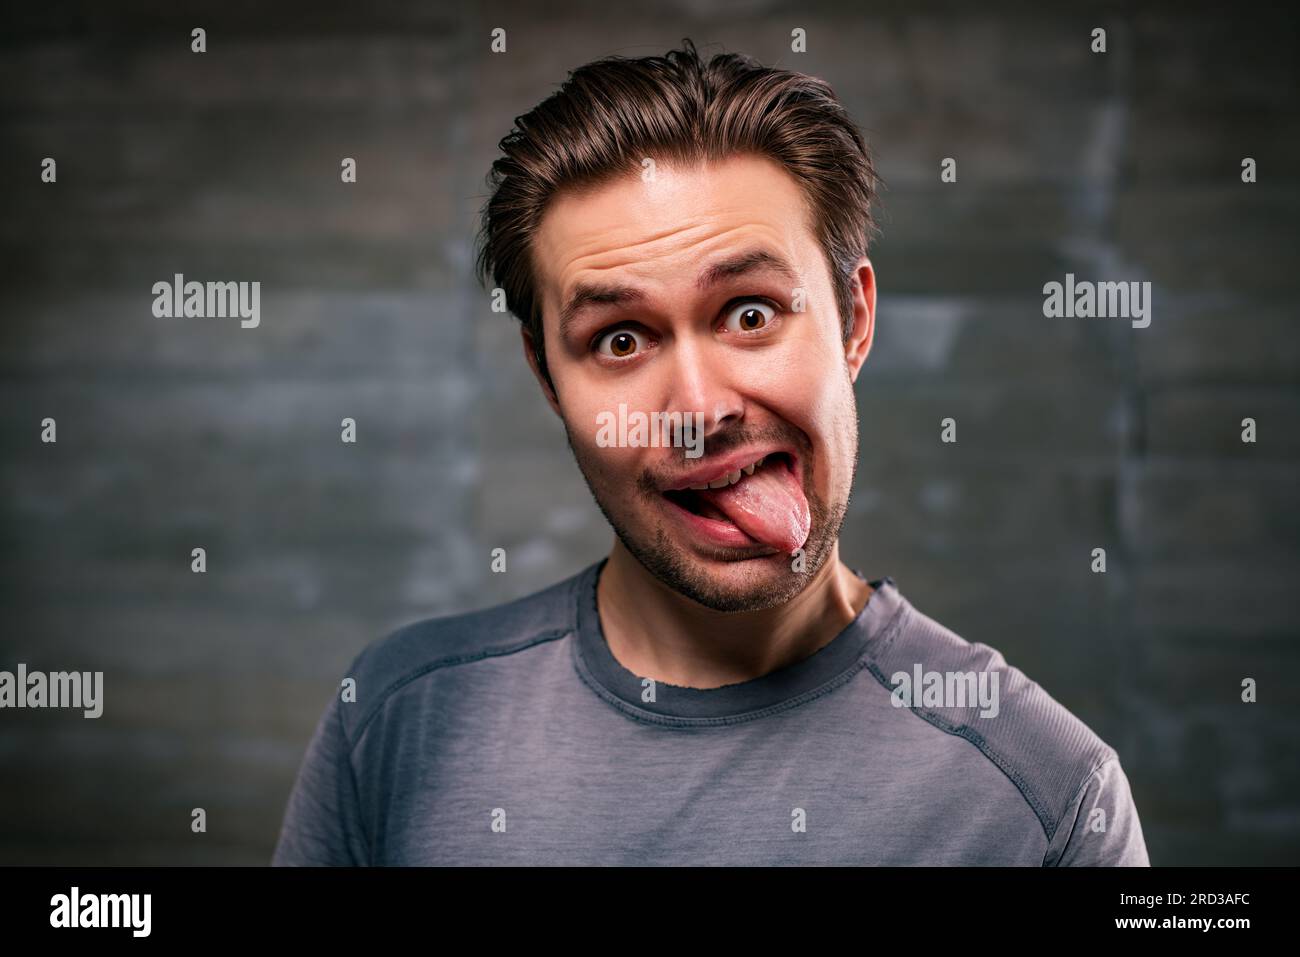 Young man showing tongue portrait on gray wall background Stock Photo